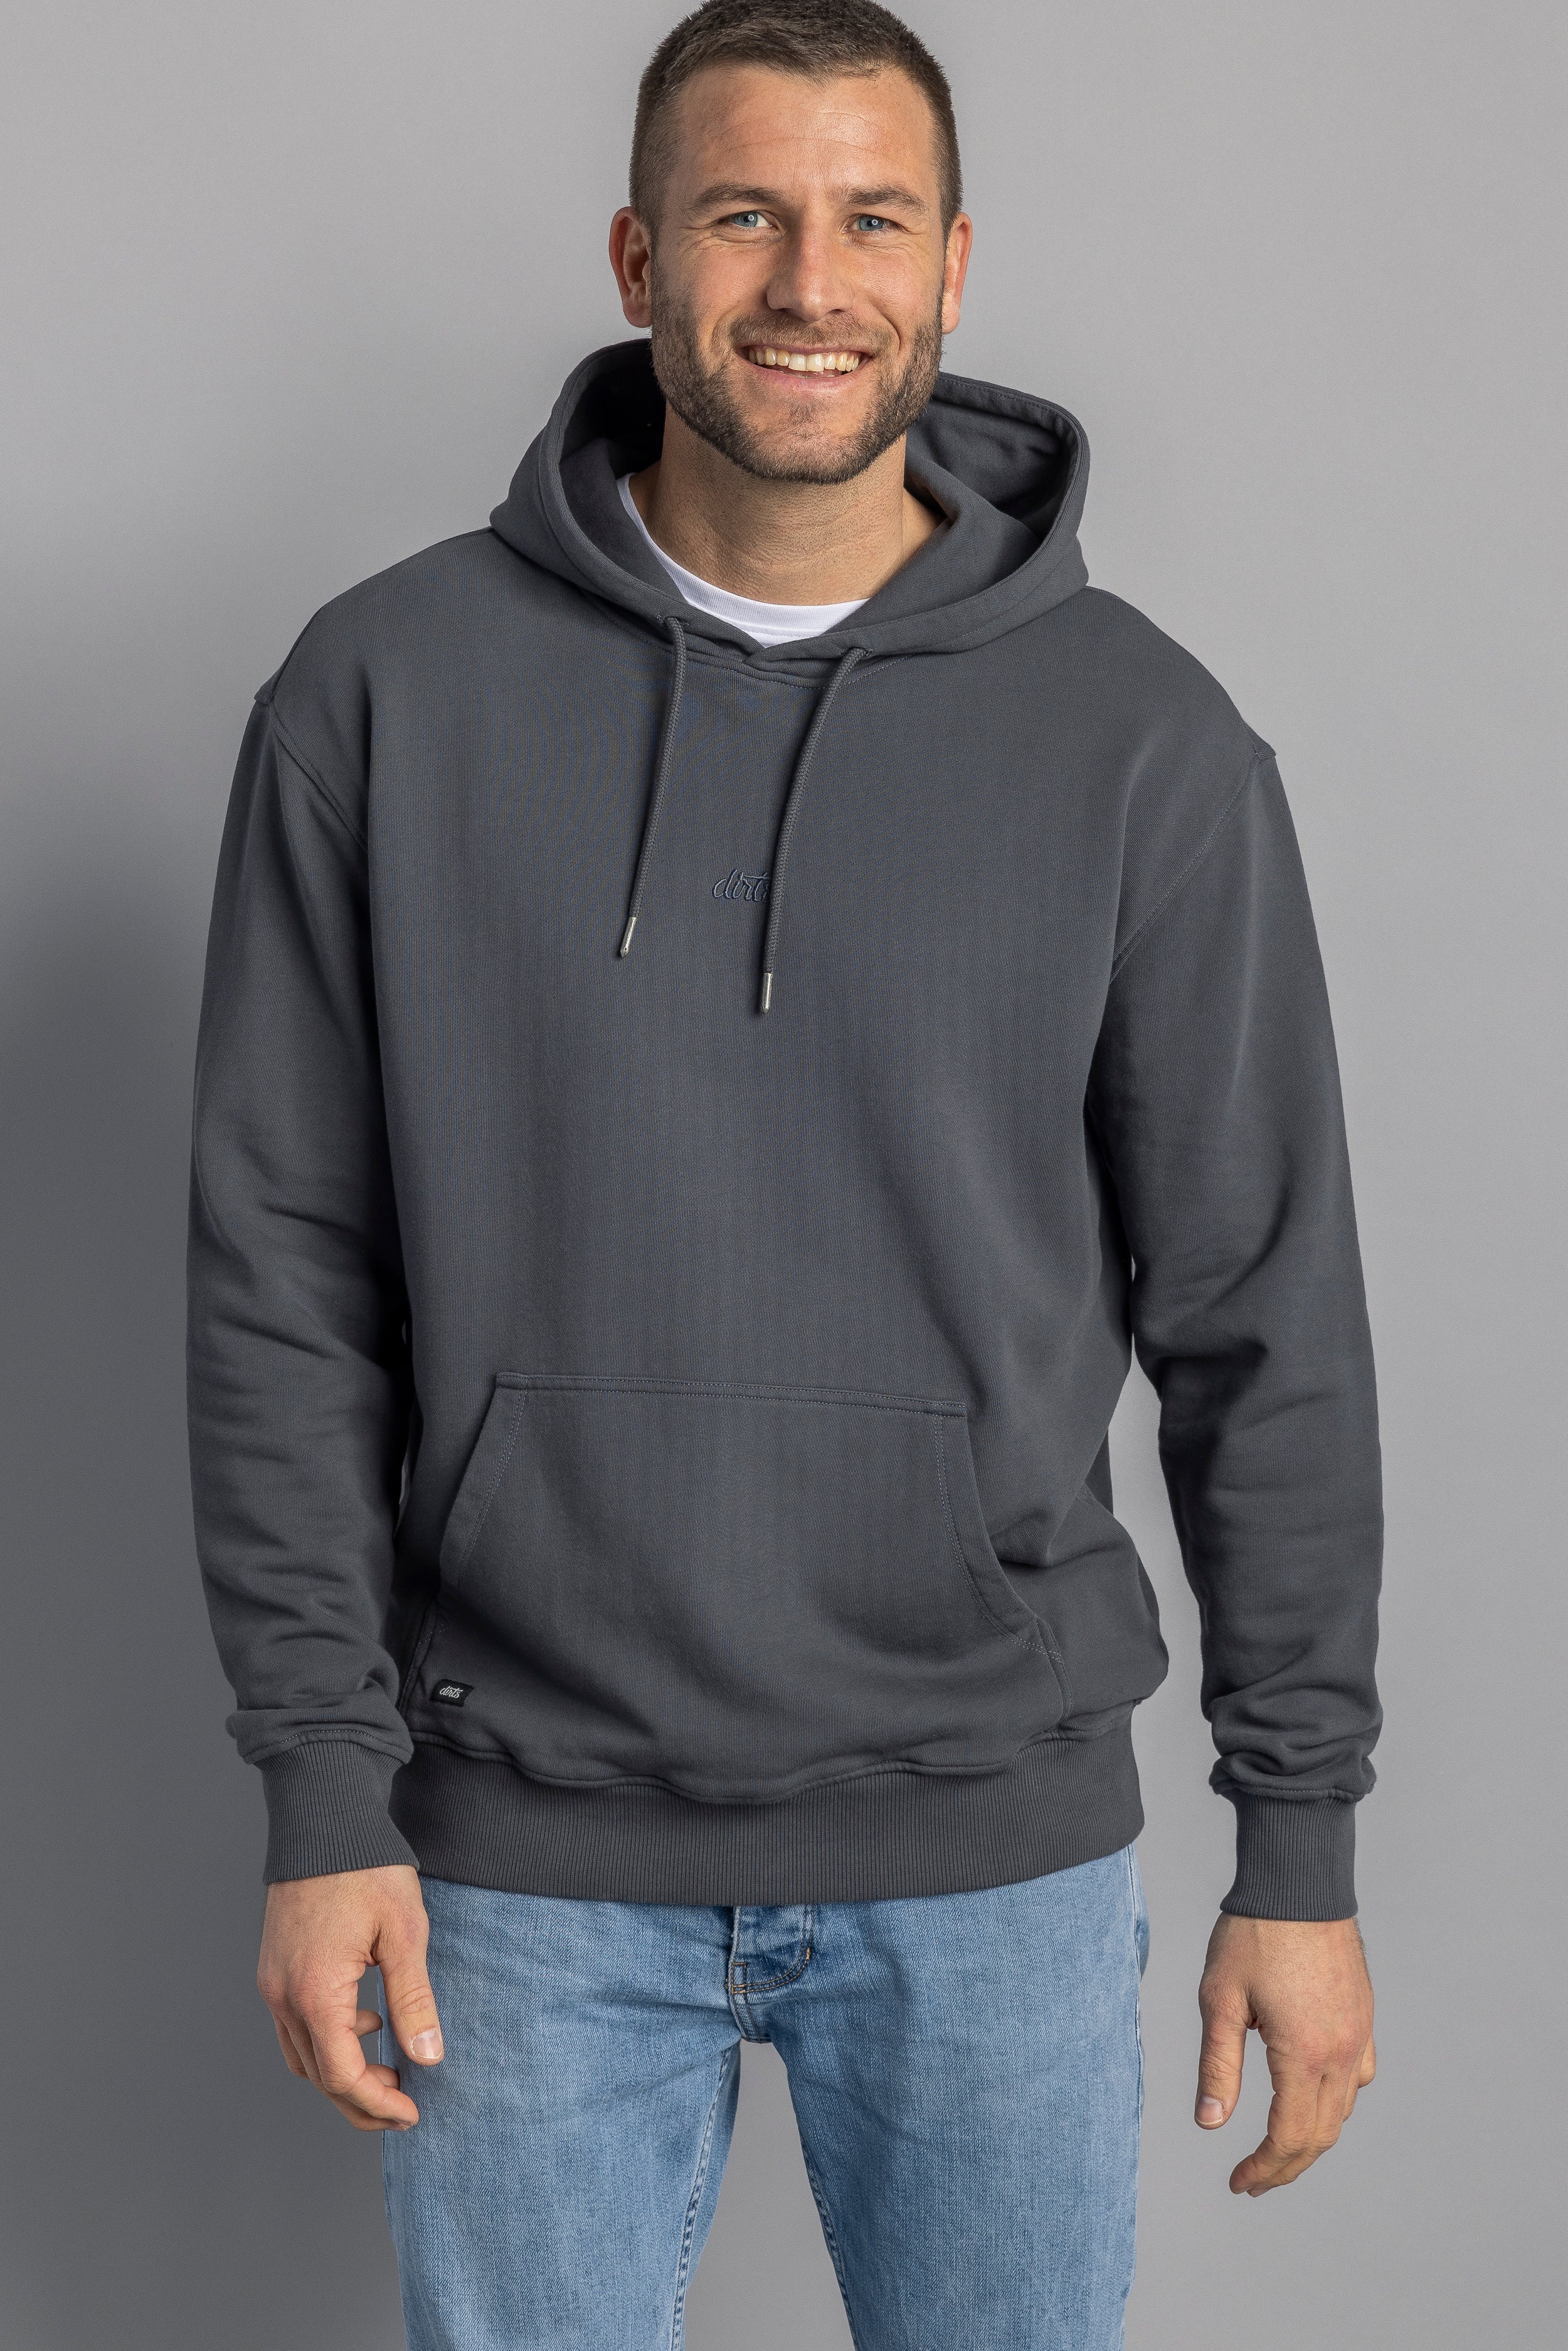 Gray hoodie logo made of 100% organic cotton from DIRTS